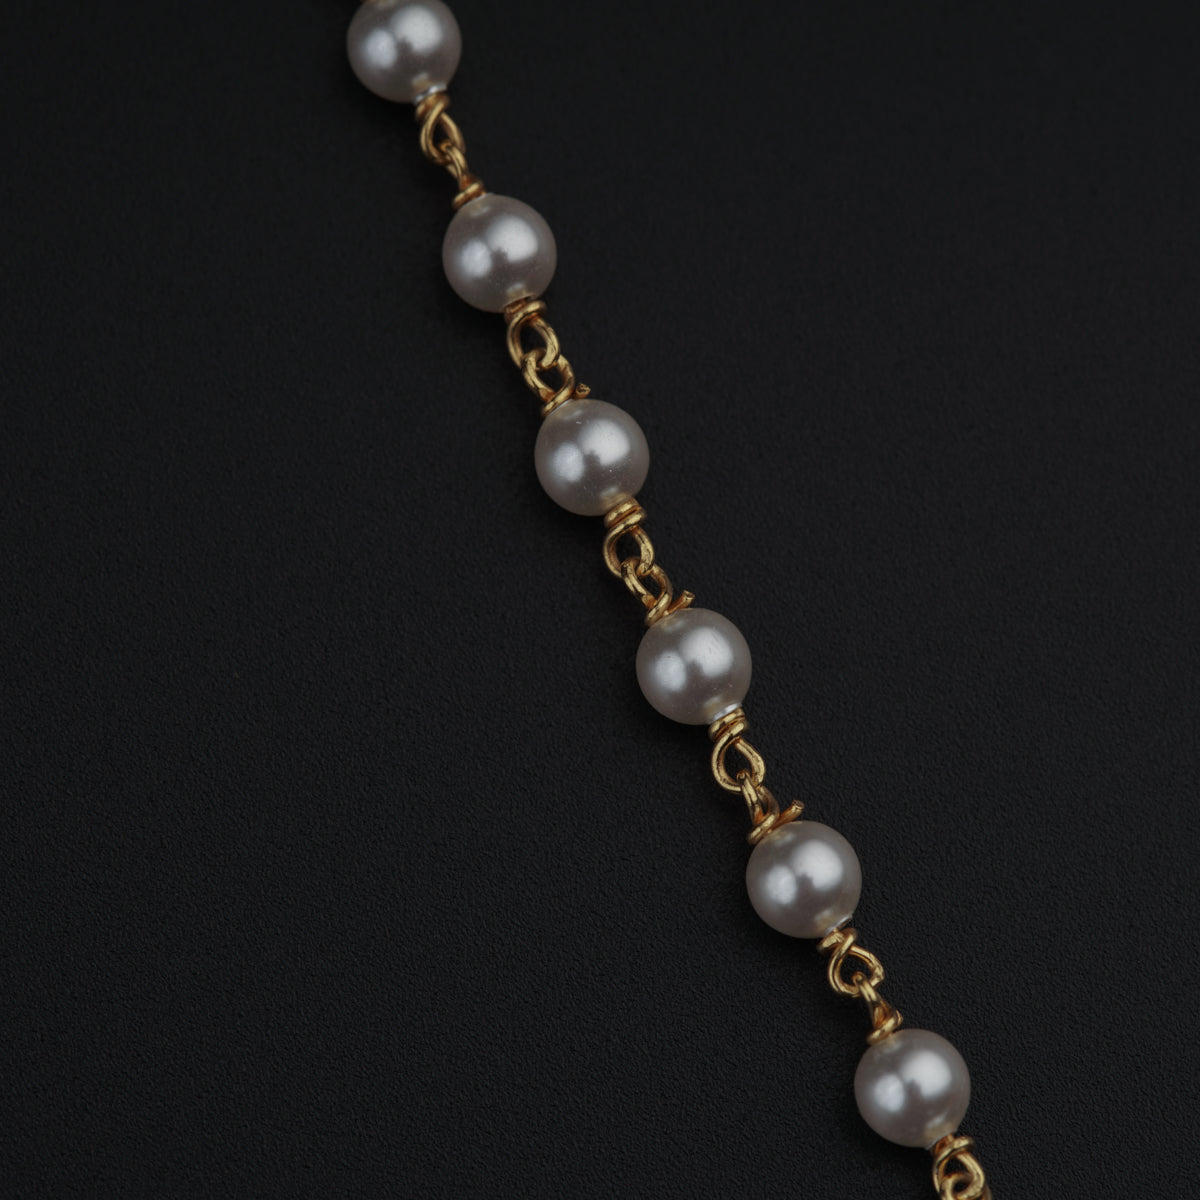 a bracelet with pearls and gold chains on a black surface